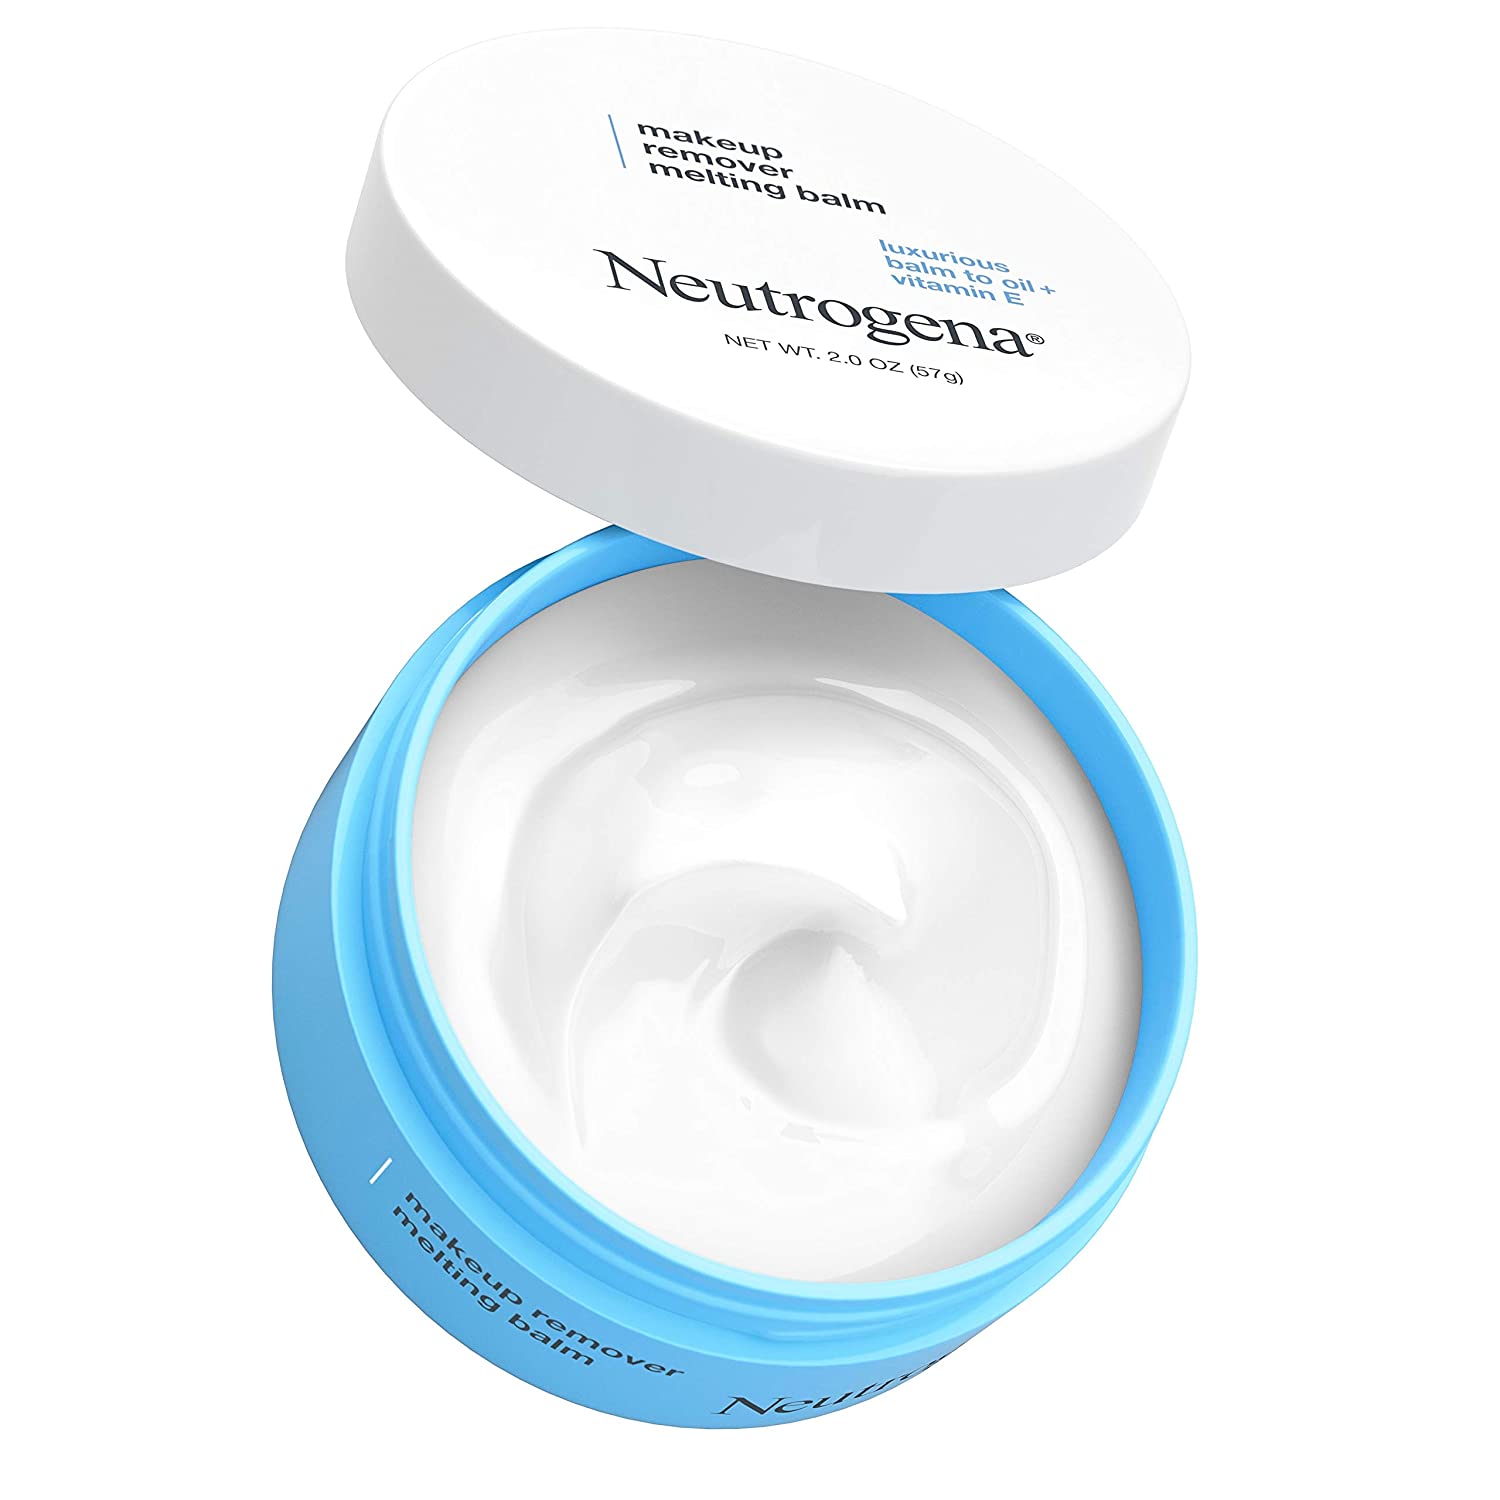 Load image into Gallery viewer, Neutrogena Makeup Remover Melting Balm
